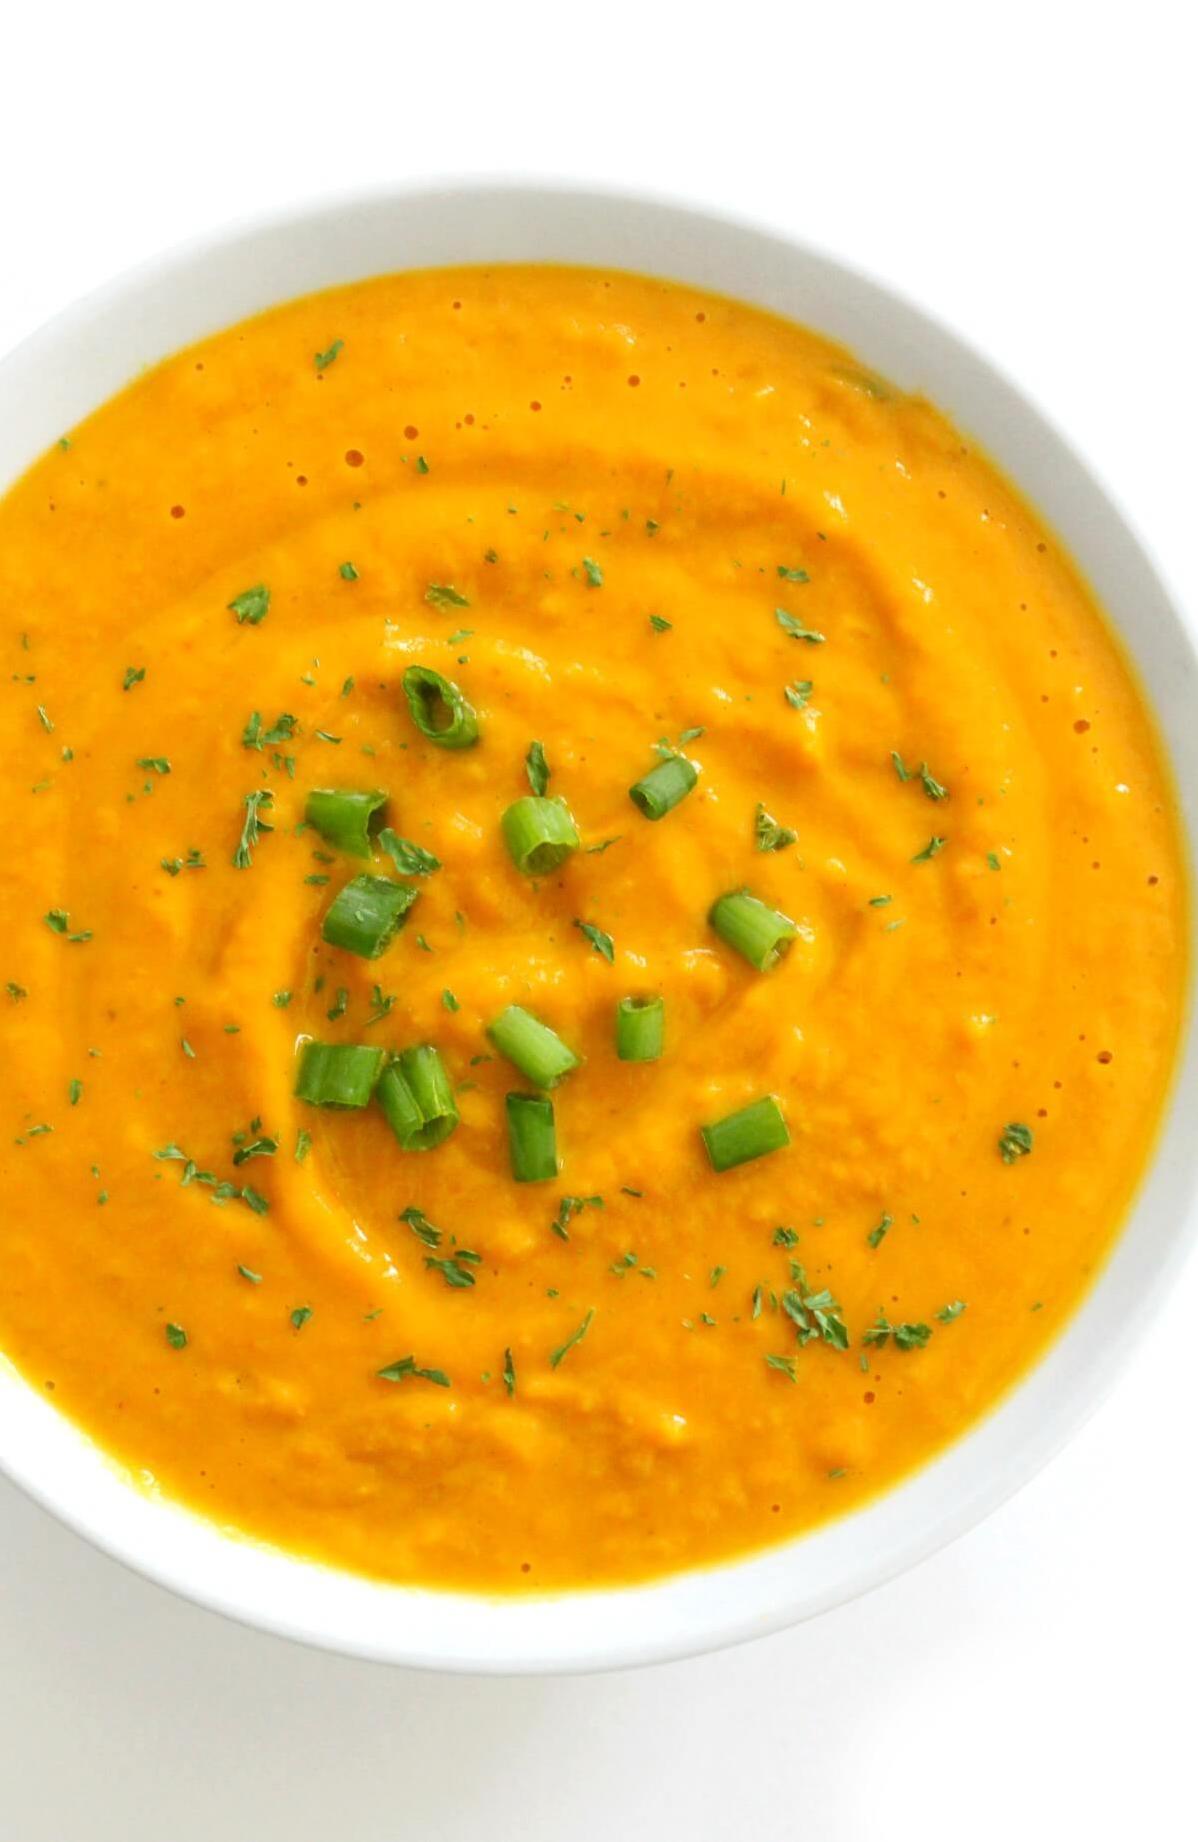  Homemade gluten-free pumpkin soup that is so flavorful and healthy, you won't be able to stop eating it!